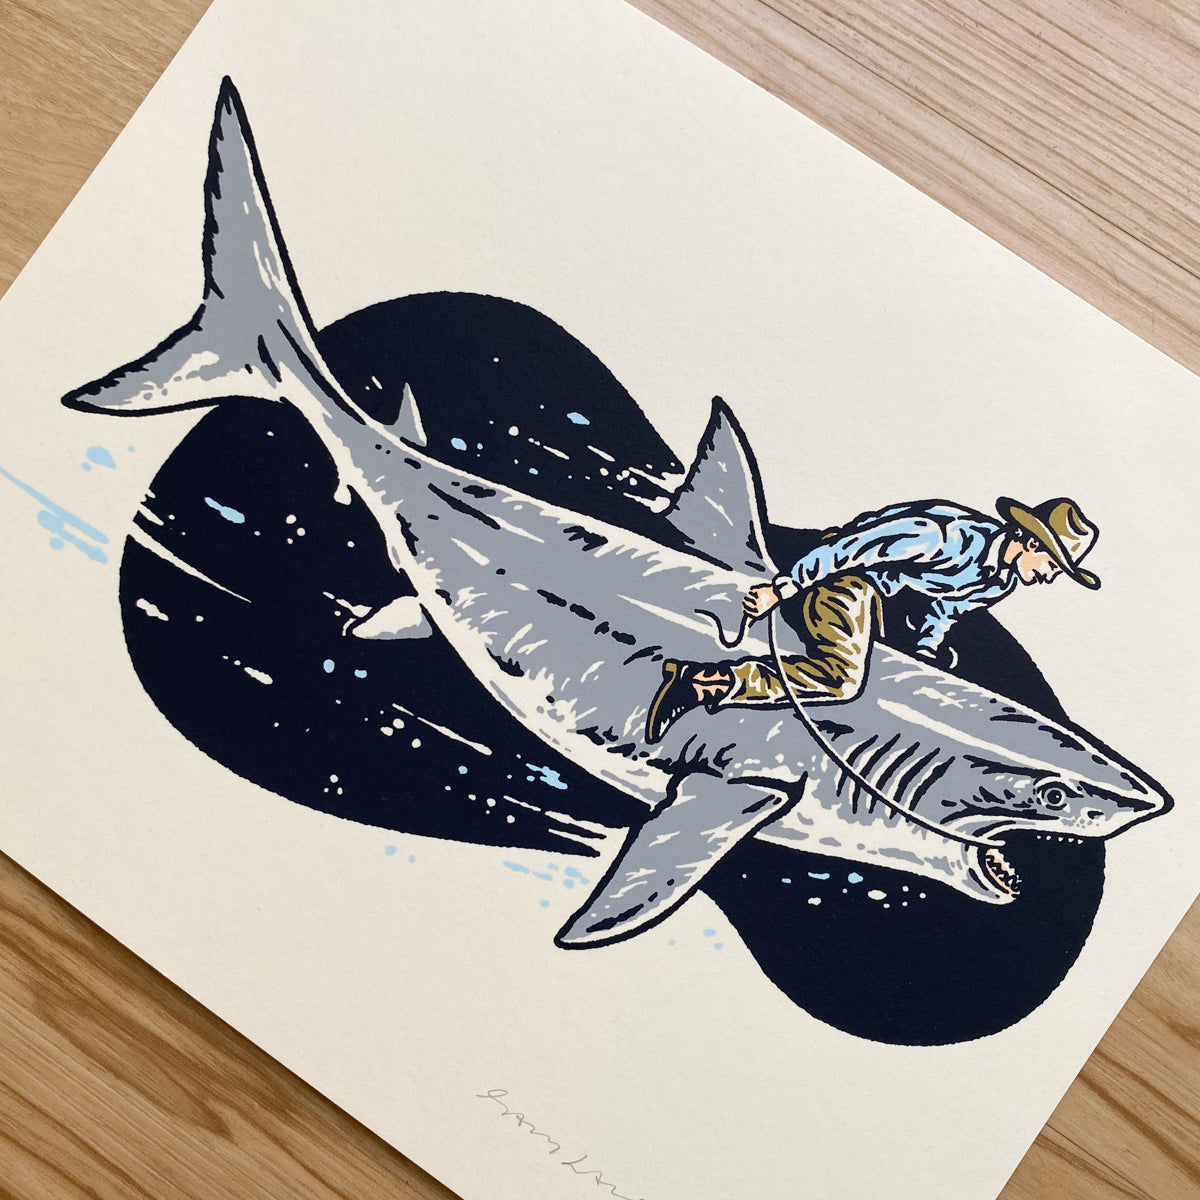 Shark Cowboy - Signed 8x10in Print #410